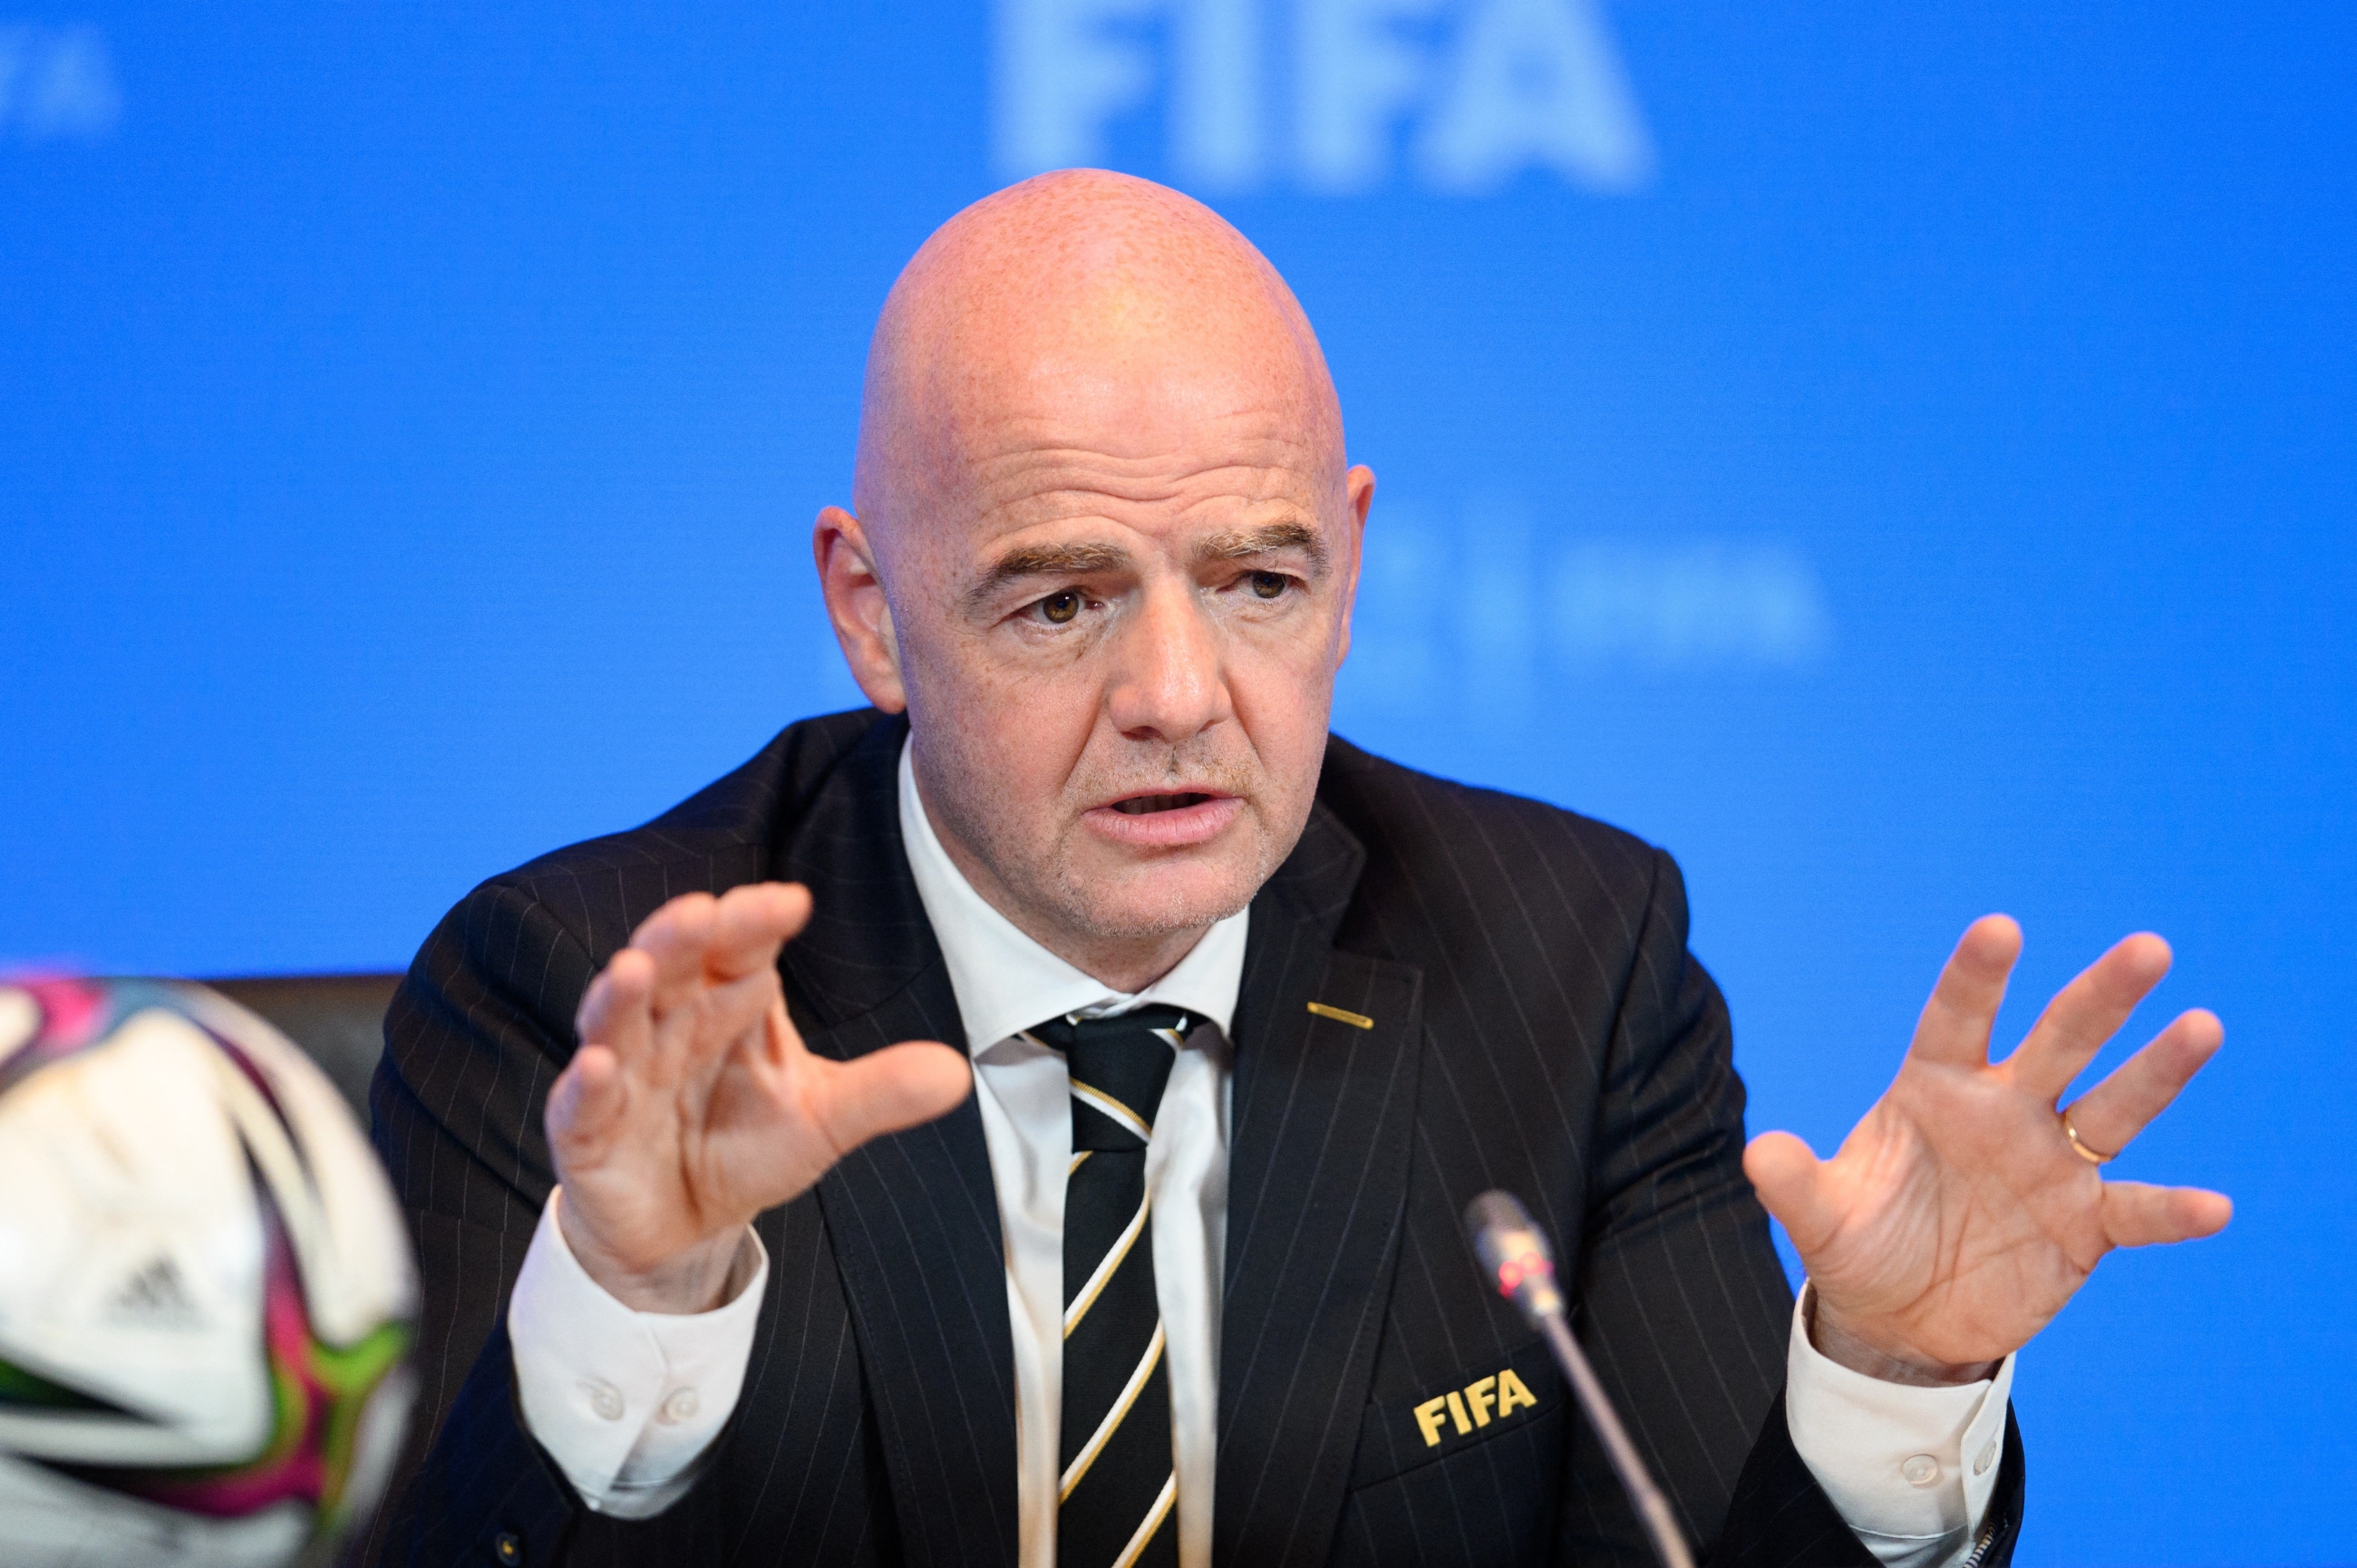 Gianni Infantino wants a World Cup every three years after Qatar  'game-changer